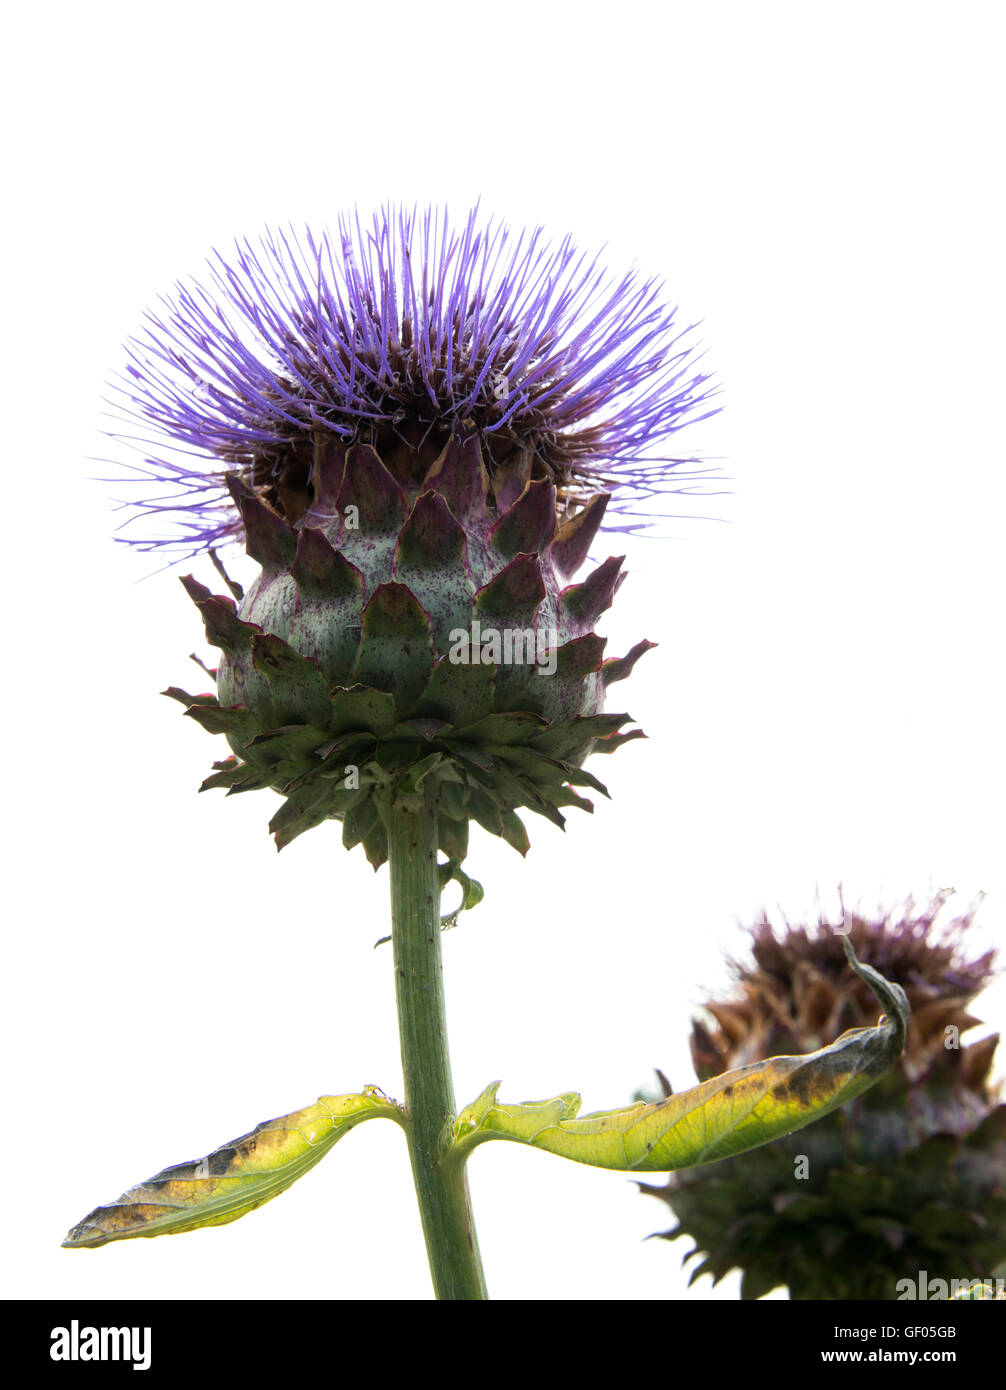 flowering purple and green artichoke on white background Stock Photo